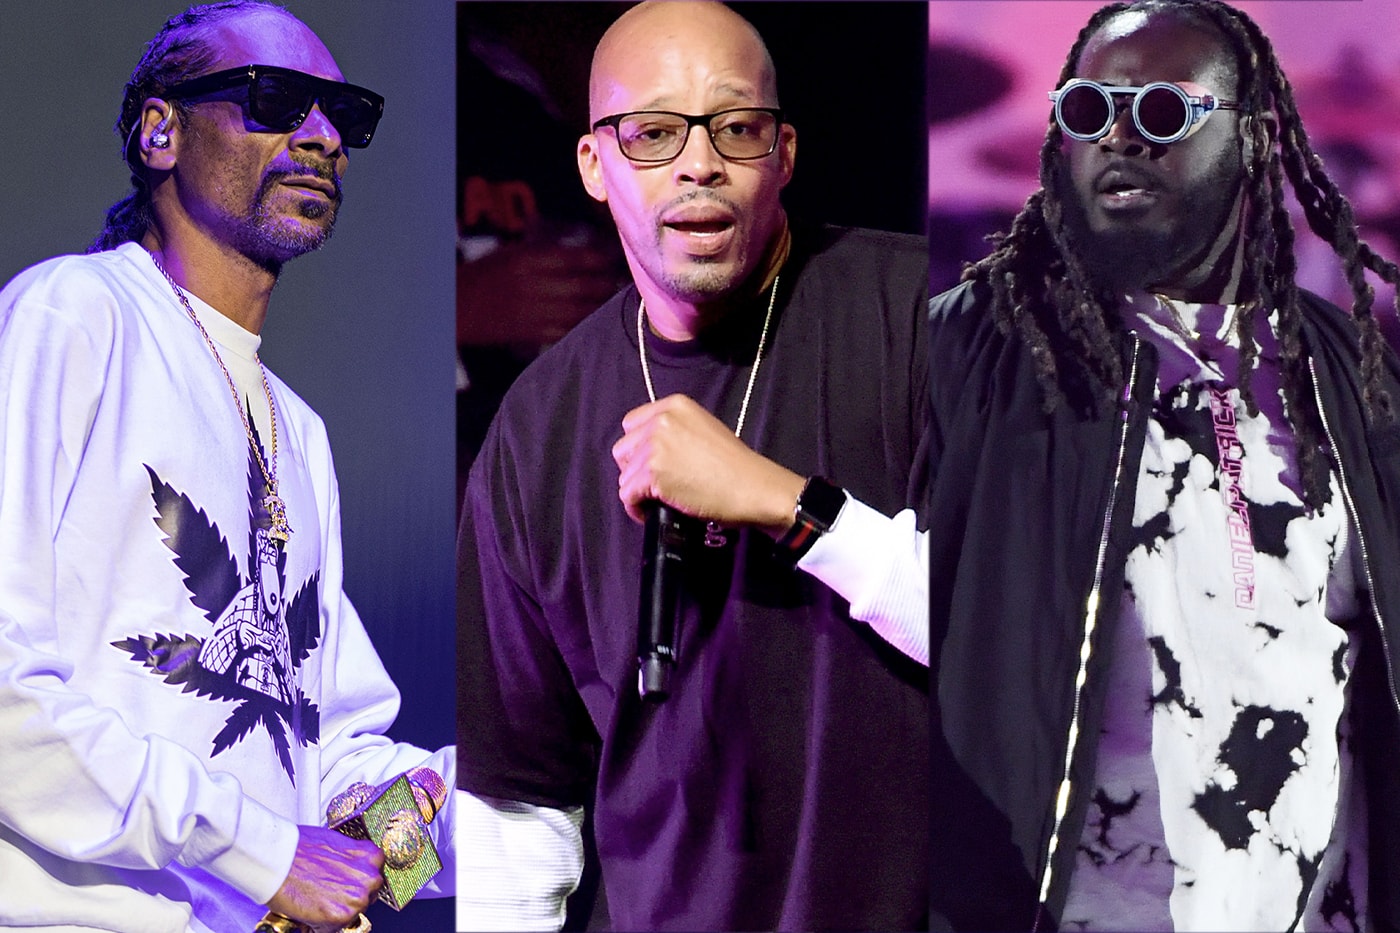 snoop dogg and t pain tour